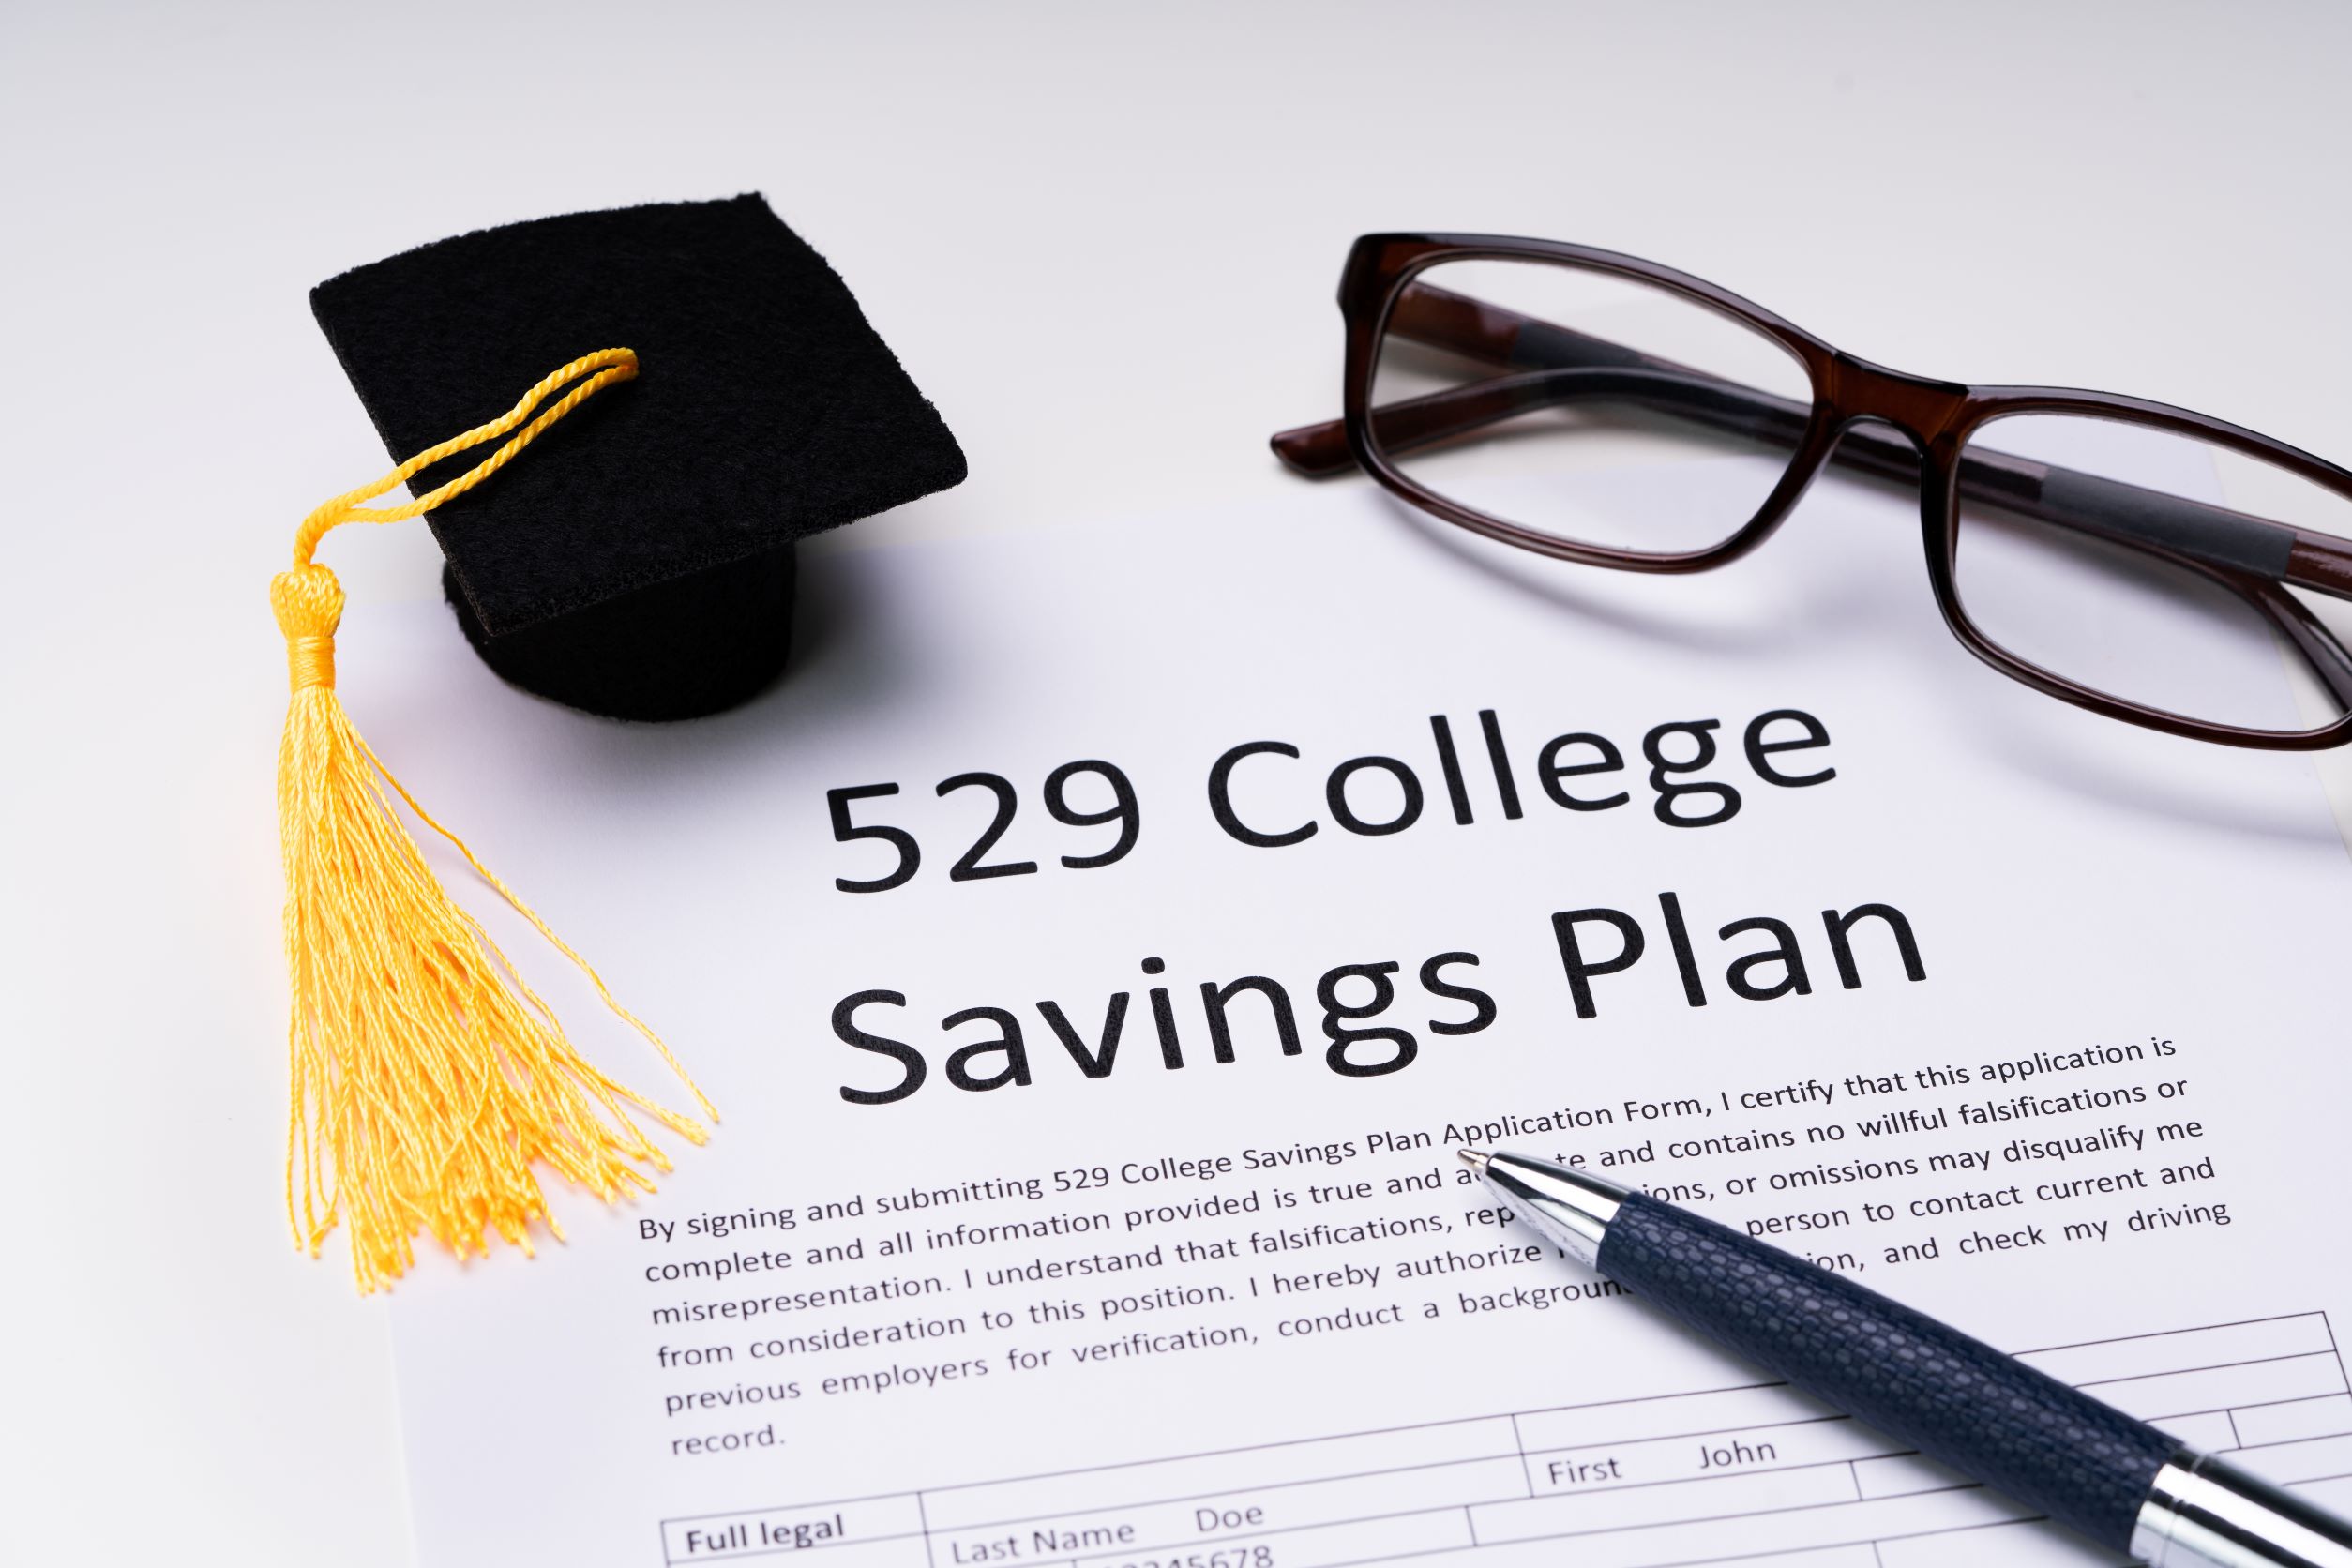 NJBEST College Savings Plans May Make College More Affordable